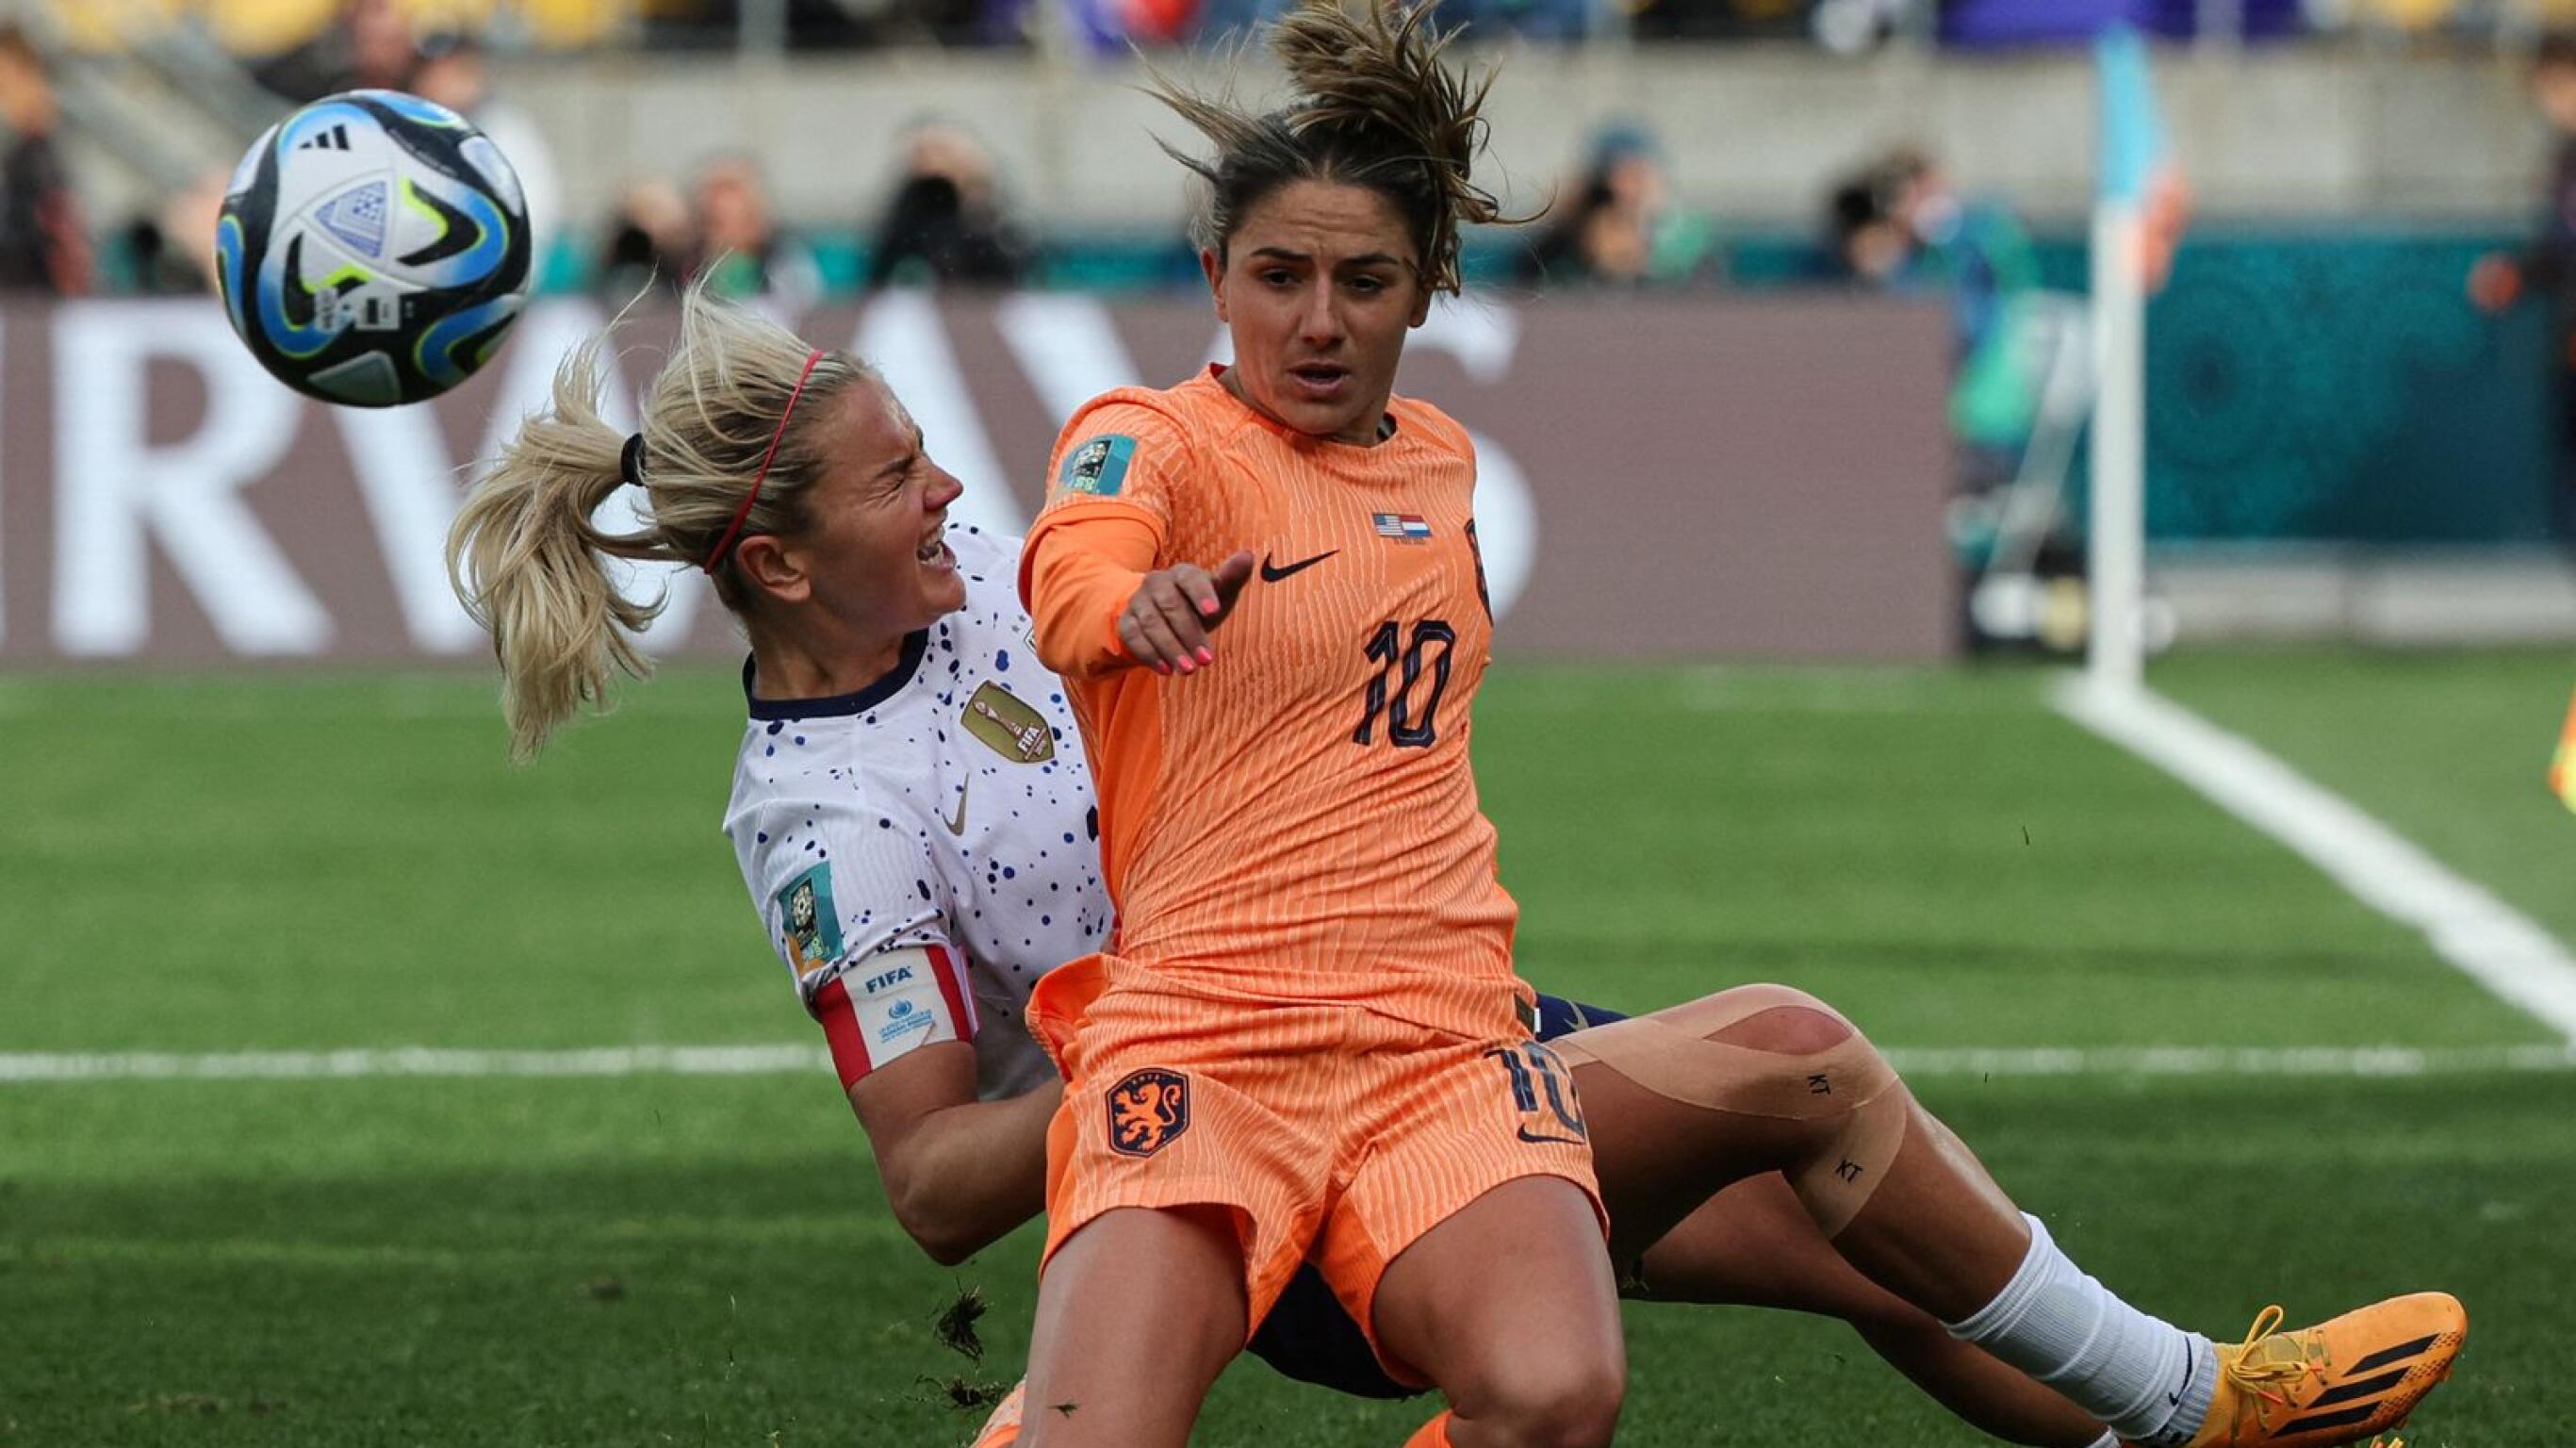 Netherlands' Danielle van de Donk fights for the ball with USA's Lindsey Horan during the Women's World Cup Group E football match at Wellington Stadium